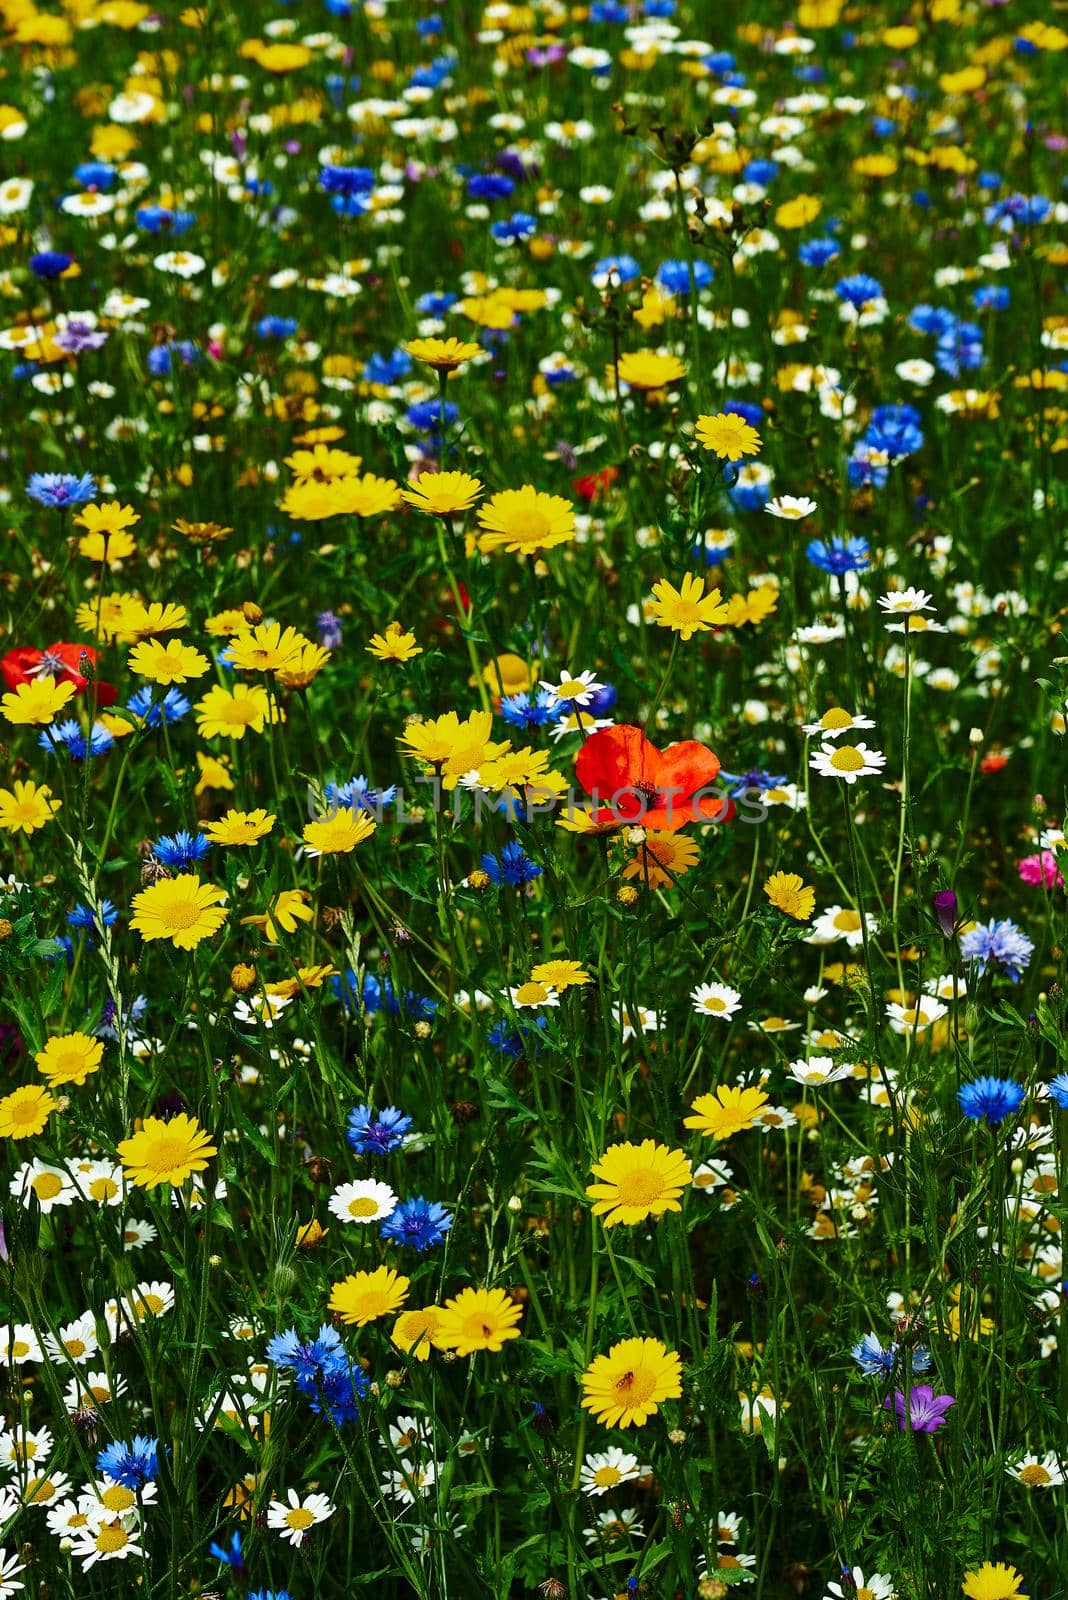 Multi coloured wild flowers with a green background